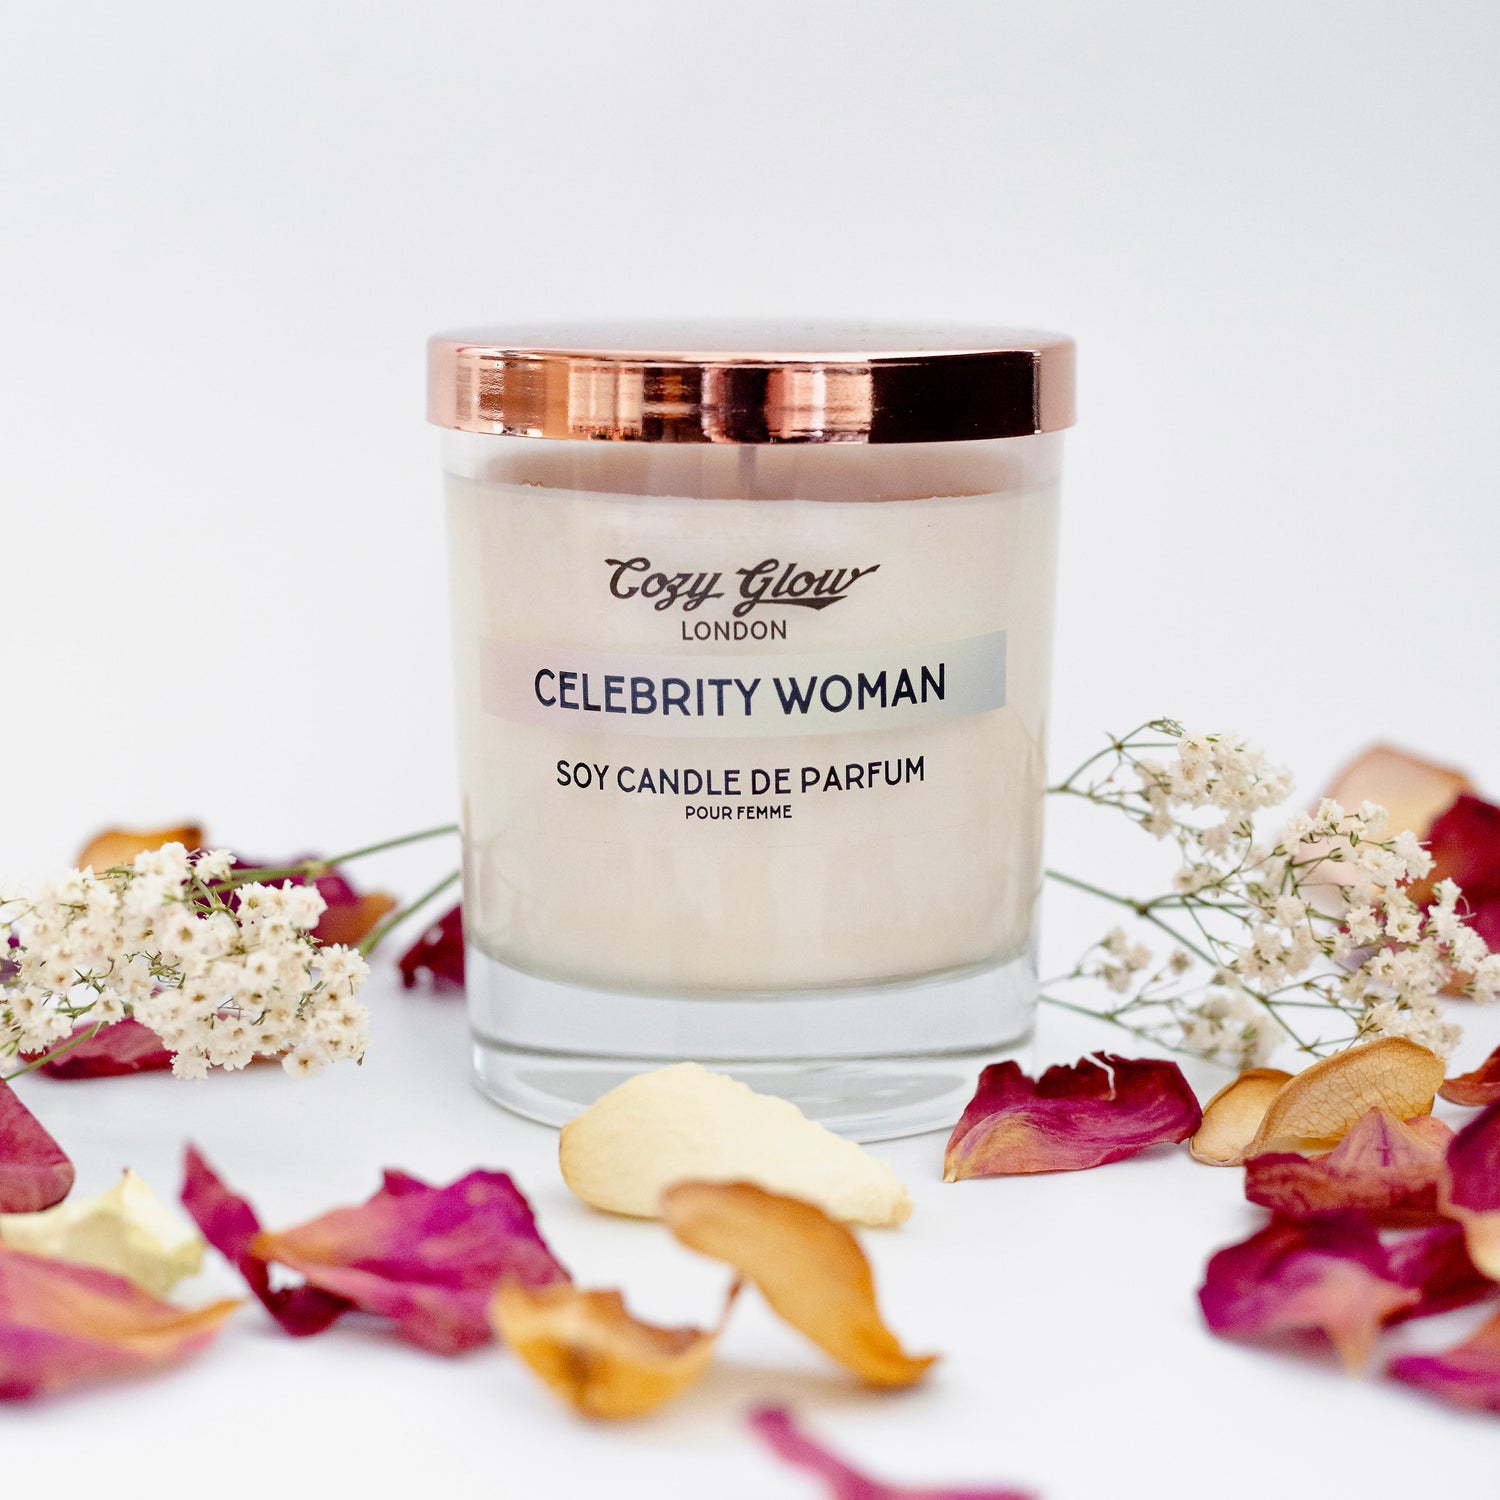 A Yodeyma Celebrity Women Scented Soy Candle